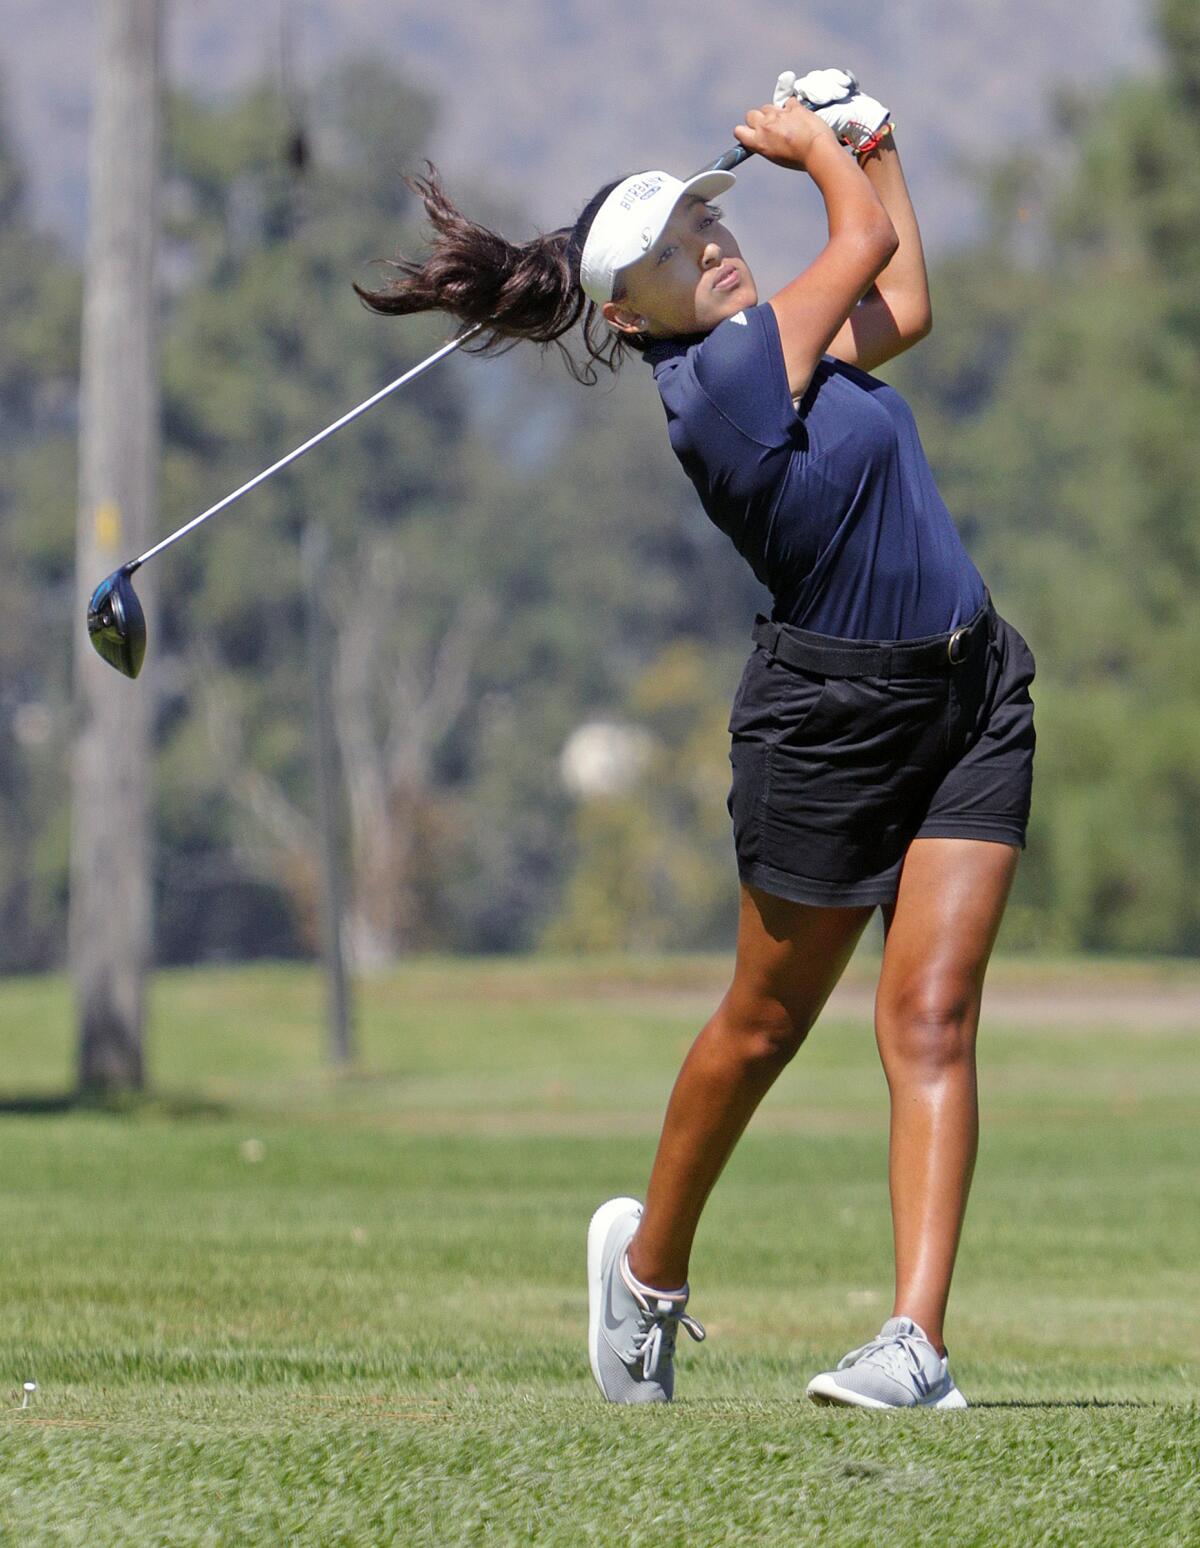 Burbank High girls' golfer Lisette Orellana carded a three-over-par 39 on Tuesday to help the Bulldogs place second in a Pacific League match at Griffith Park's Harding Golf Course.